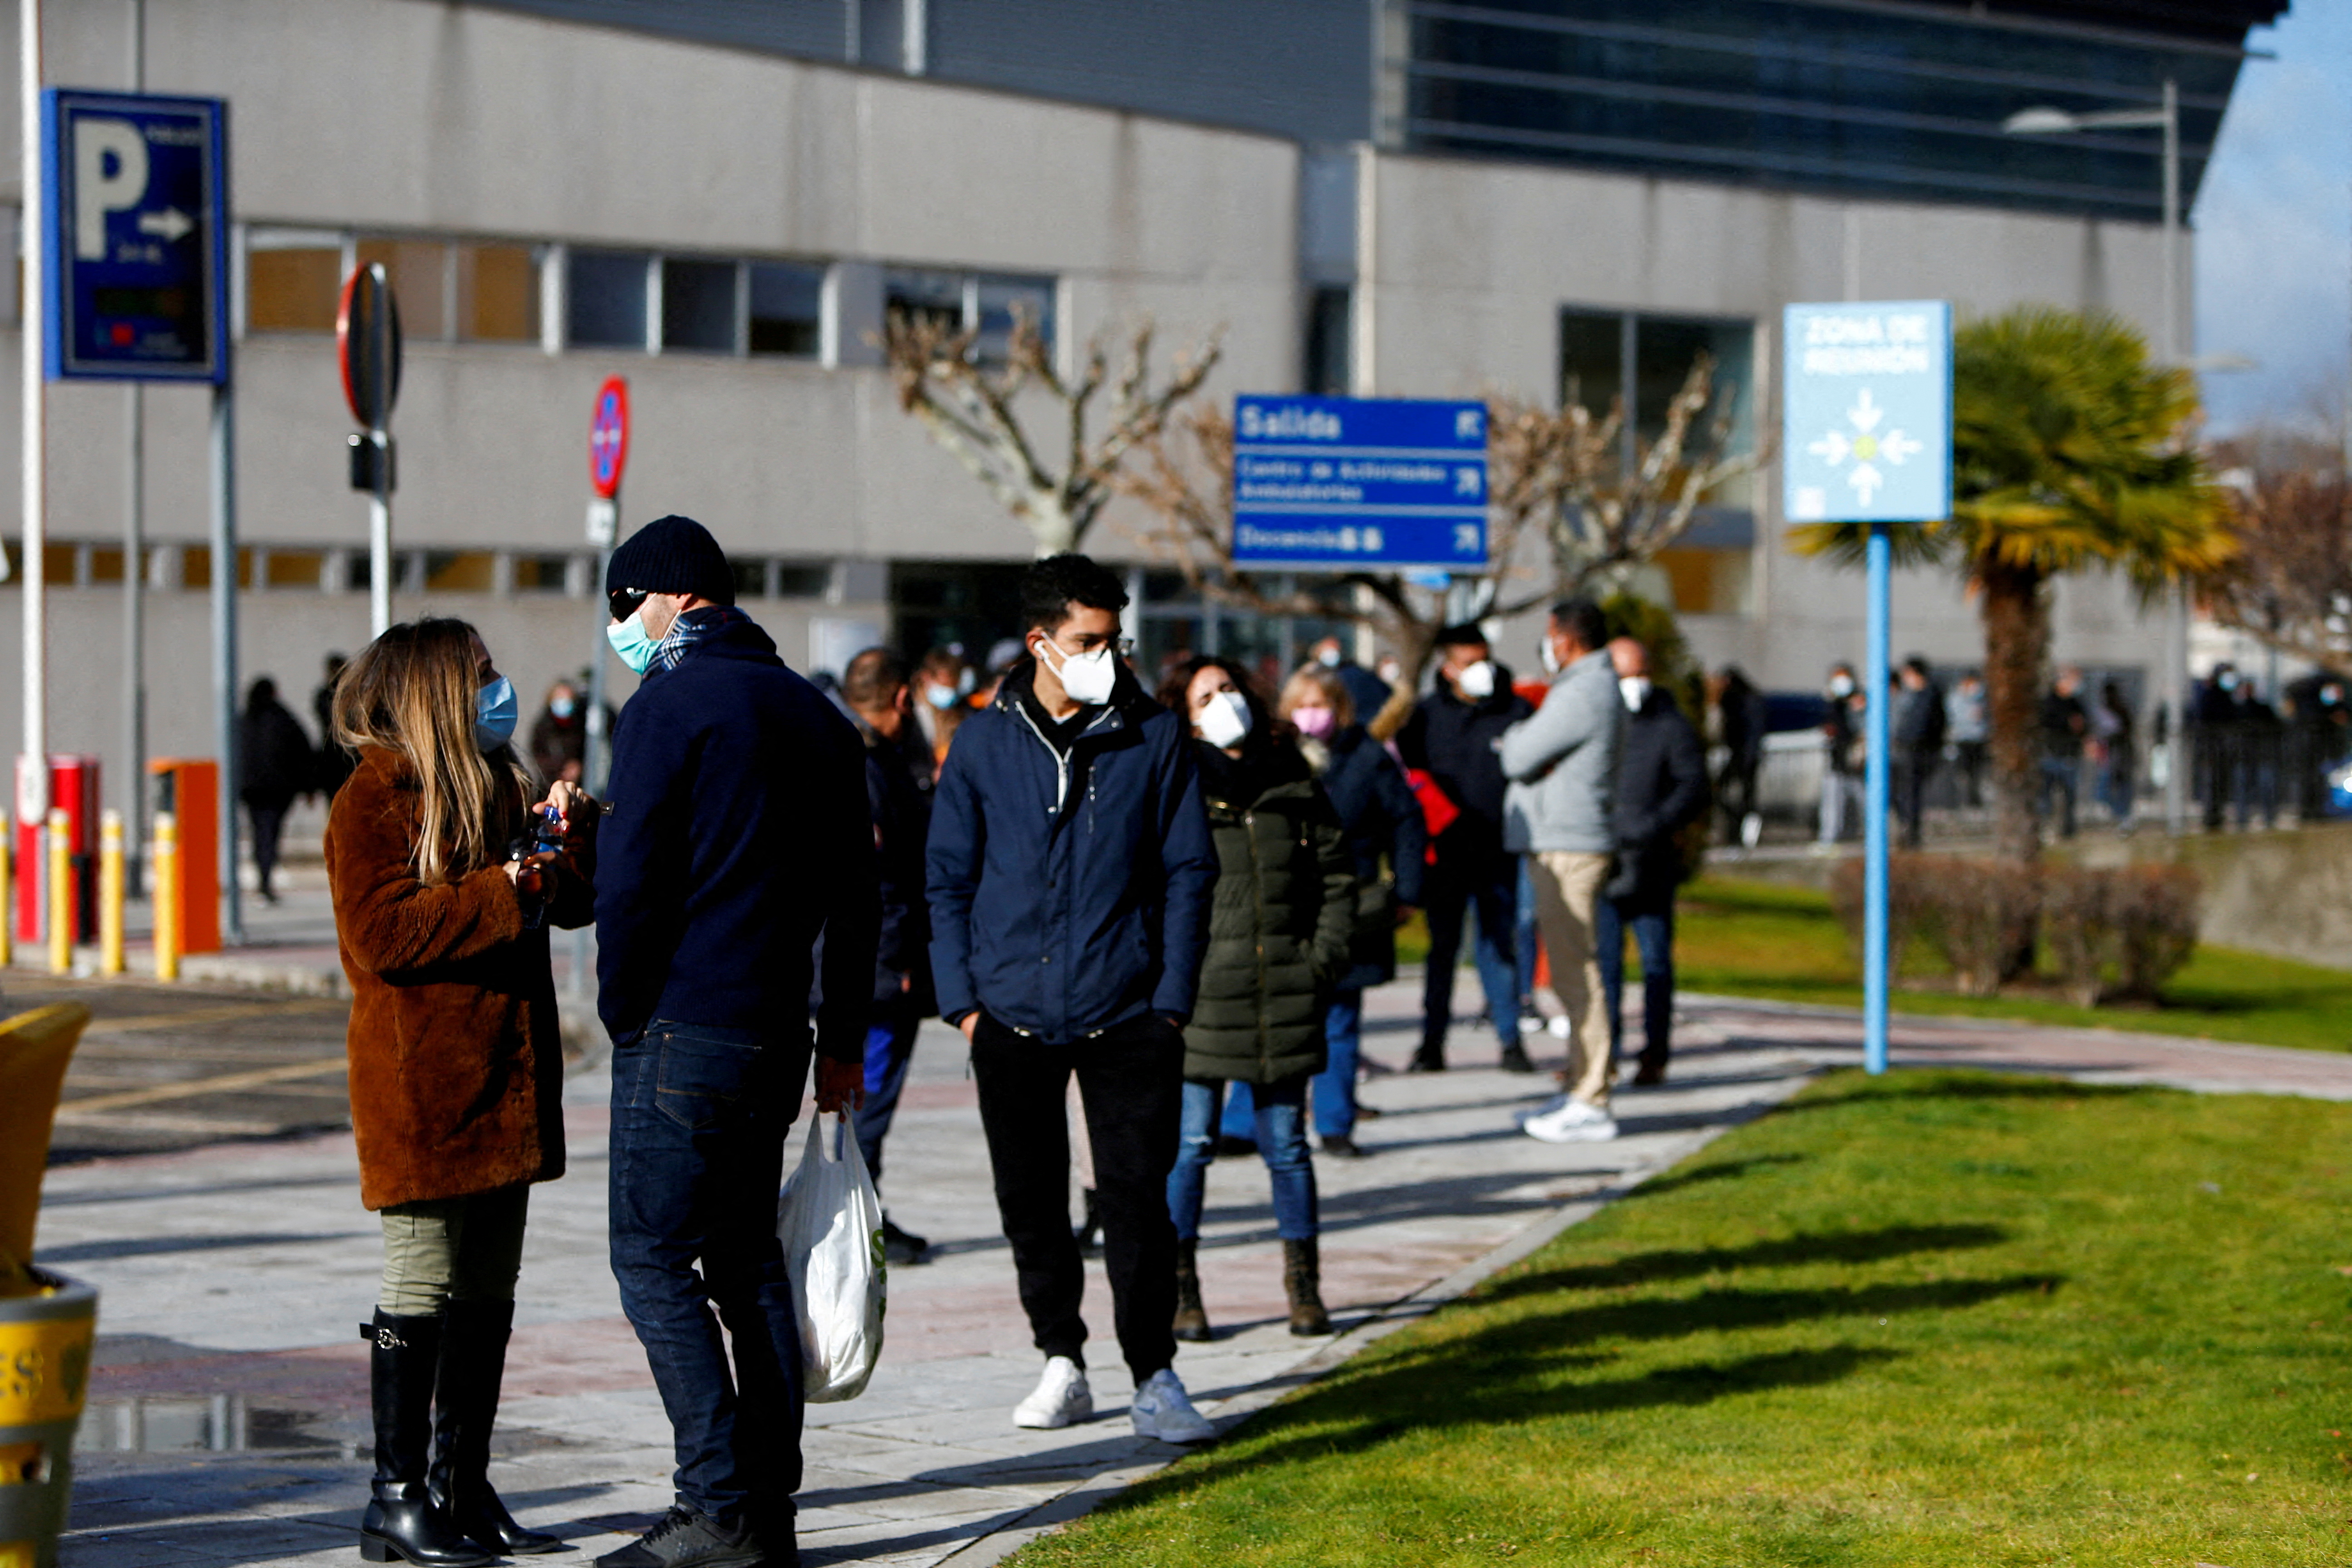 People queue to get tested for the coronavirus disease (COVID-19) after the Christmas holiday break, amid the COVID-19 pandemic, at Doce de Octubre Hospital in Madrid, Spain December 27, 2021. REUTERS/Javier Barbancho